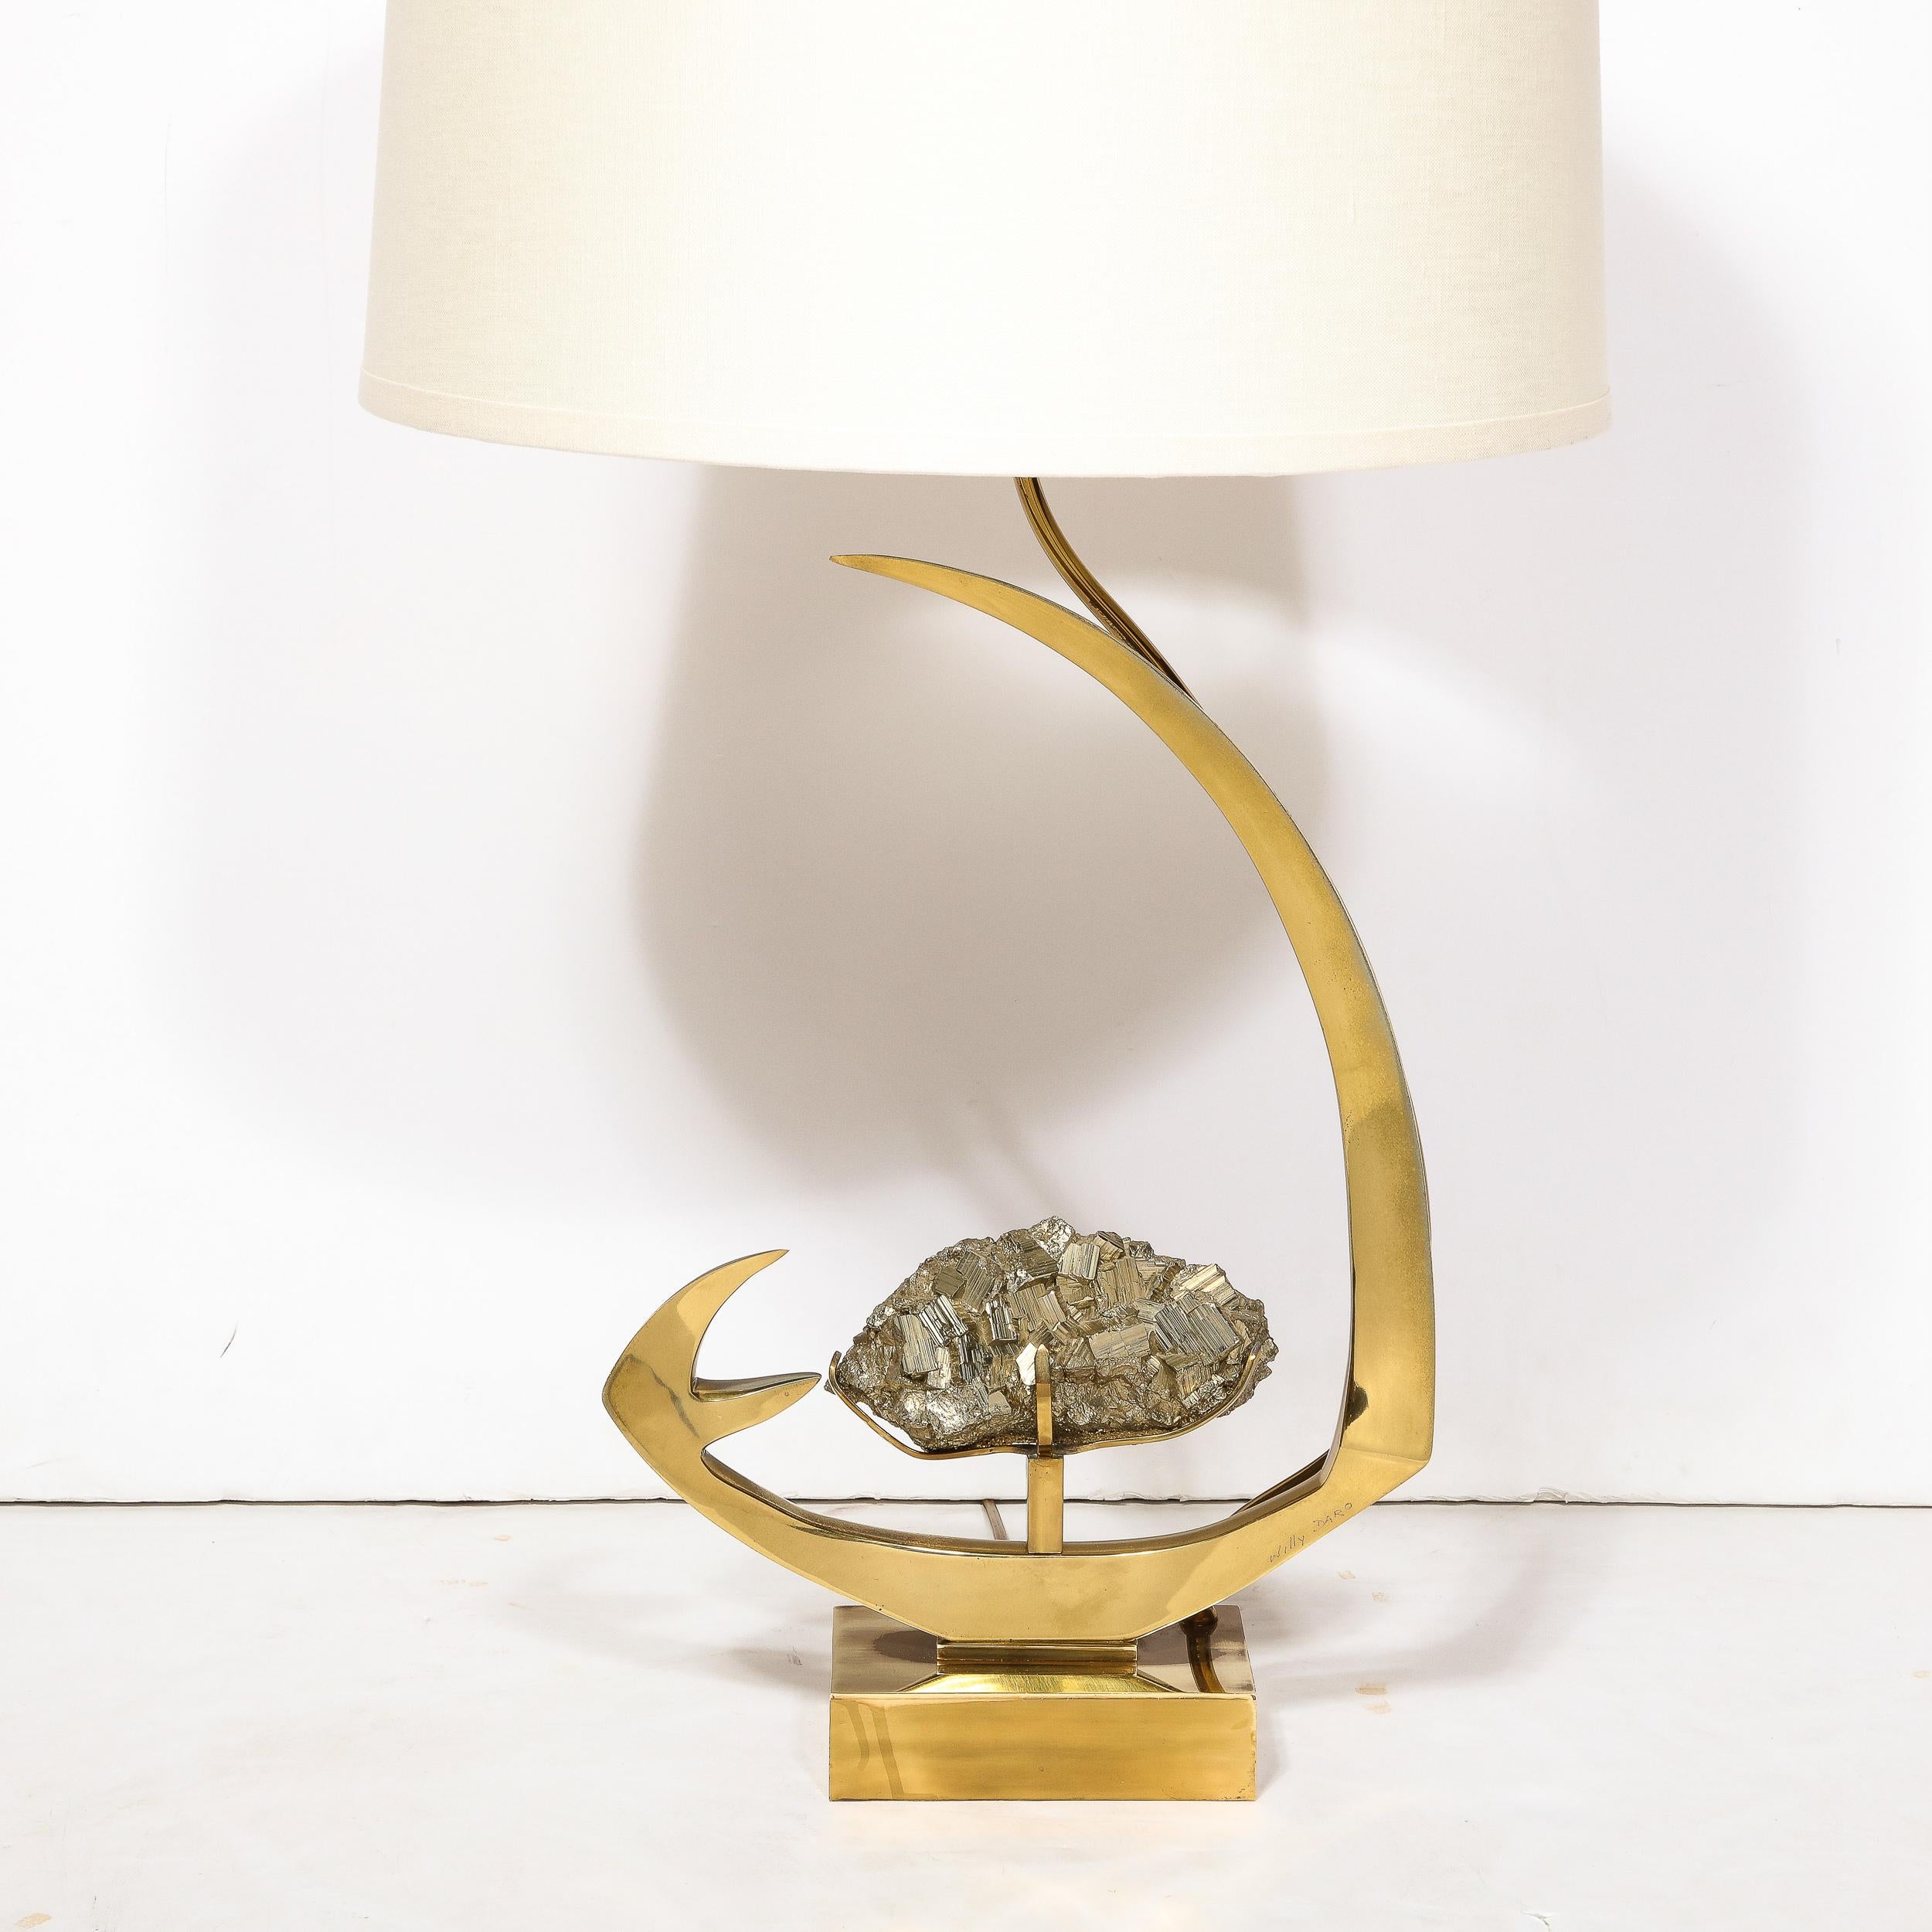 This striking table lamp is truly a gem of Mid-Century Modernist design paired with stunningly sharp and precise execution and lovely materials, created by the Artist Willy Daro in Belgium Circa 1970. Featuring a stylized angular swoop in polished